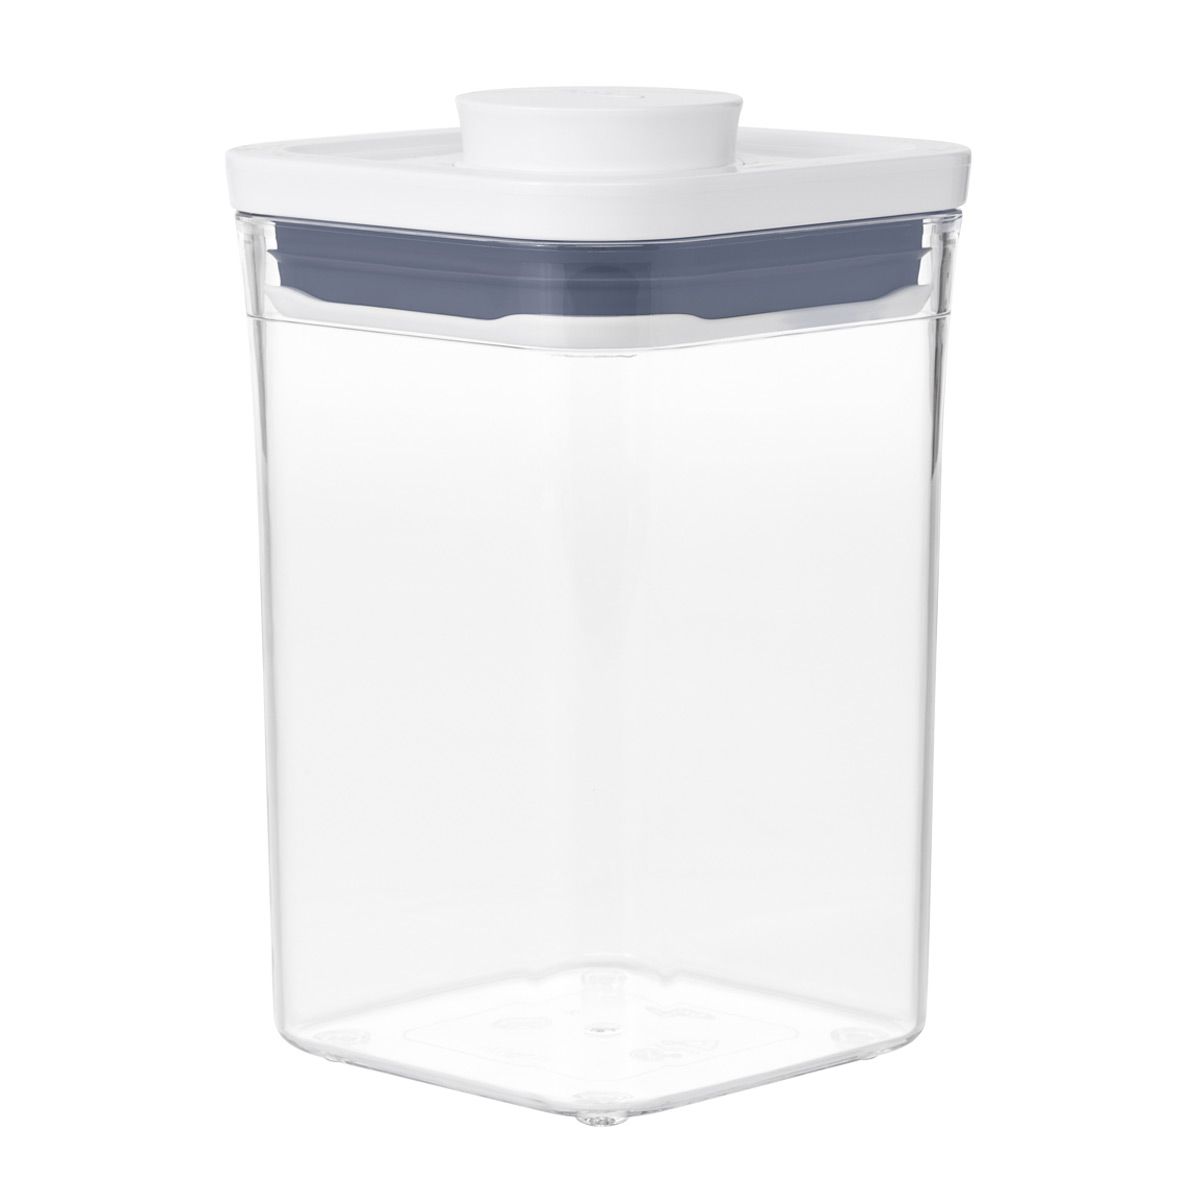 OXO 1.1 qt. Short Small Square POP Container ShortSKU:100751453.533 Reviews | The Container Store